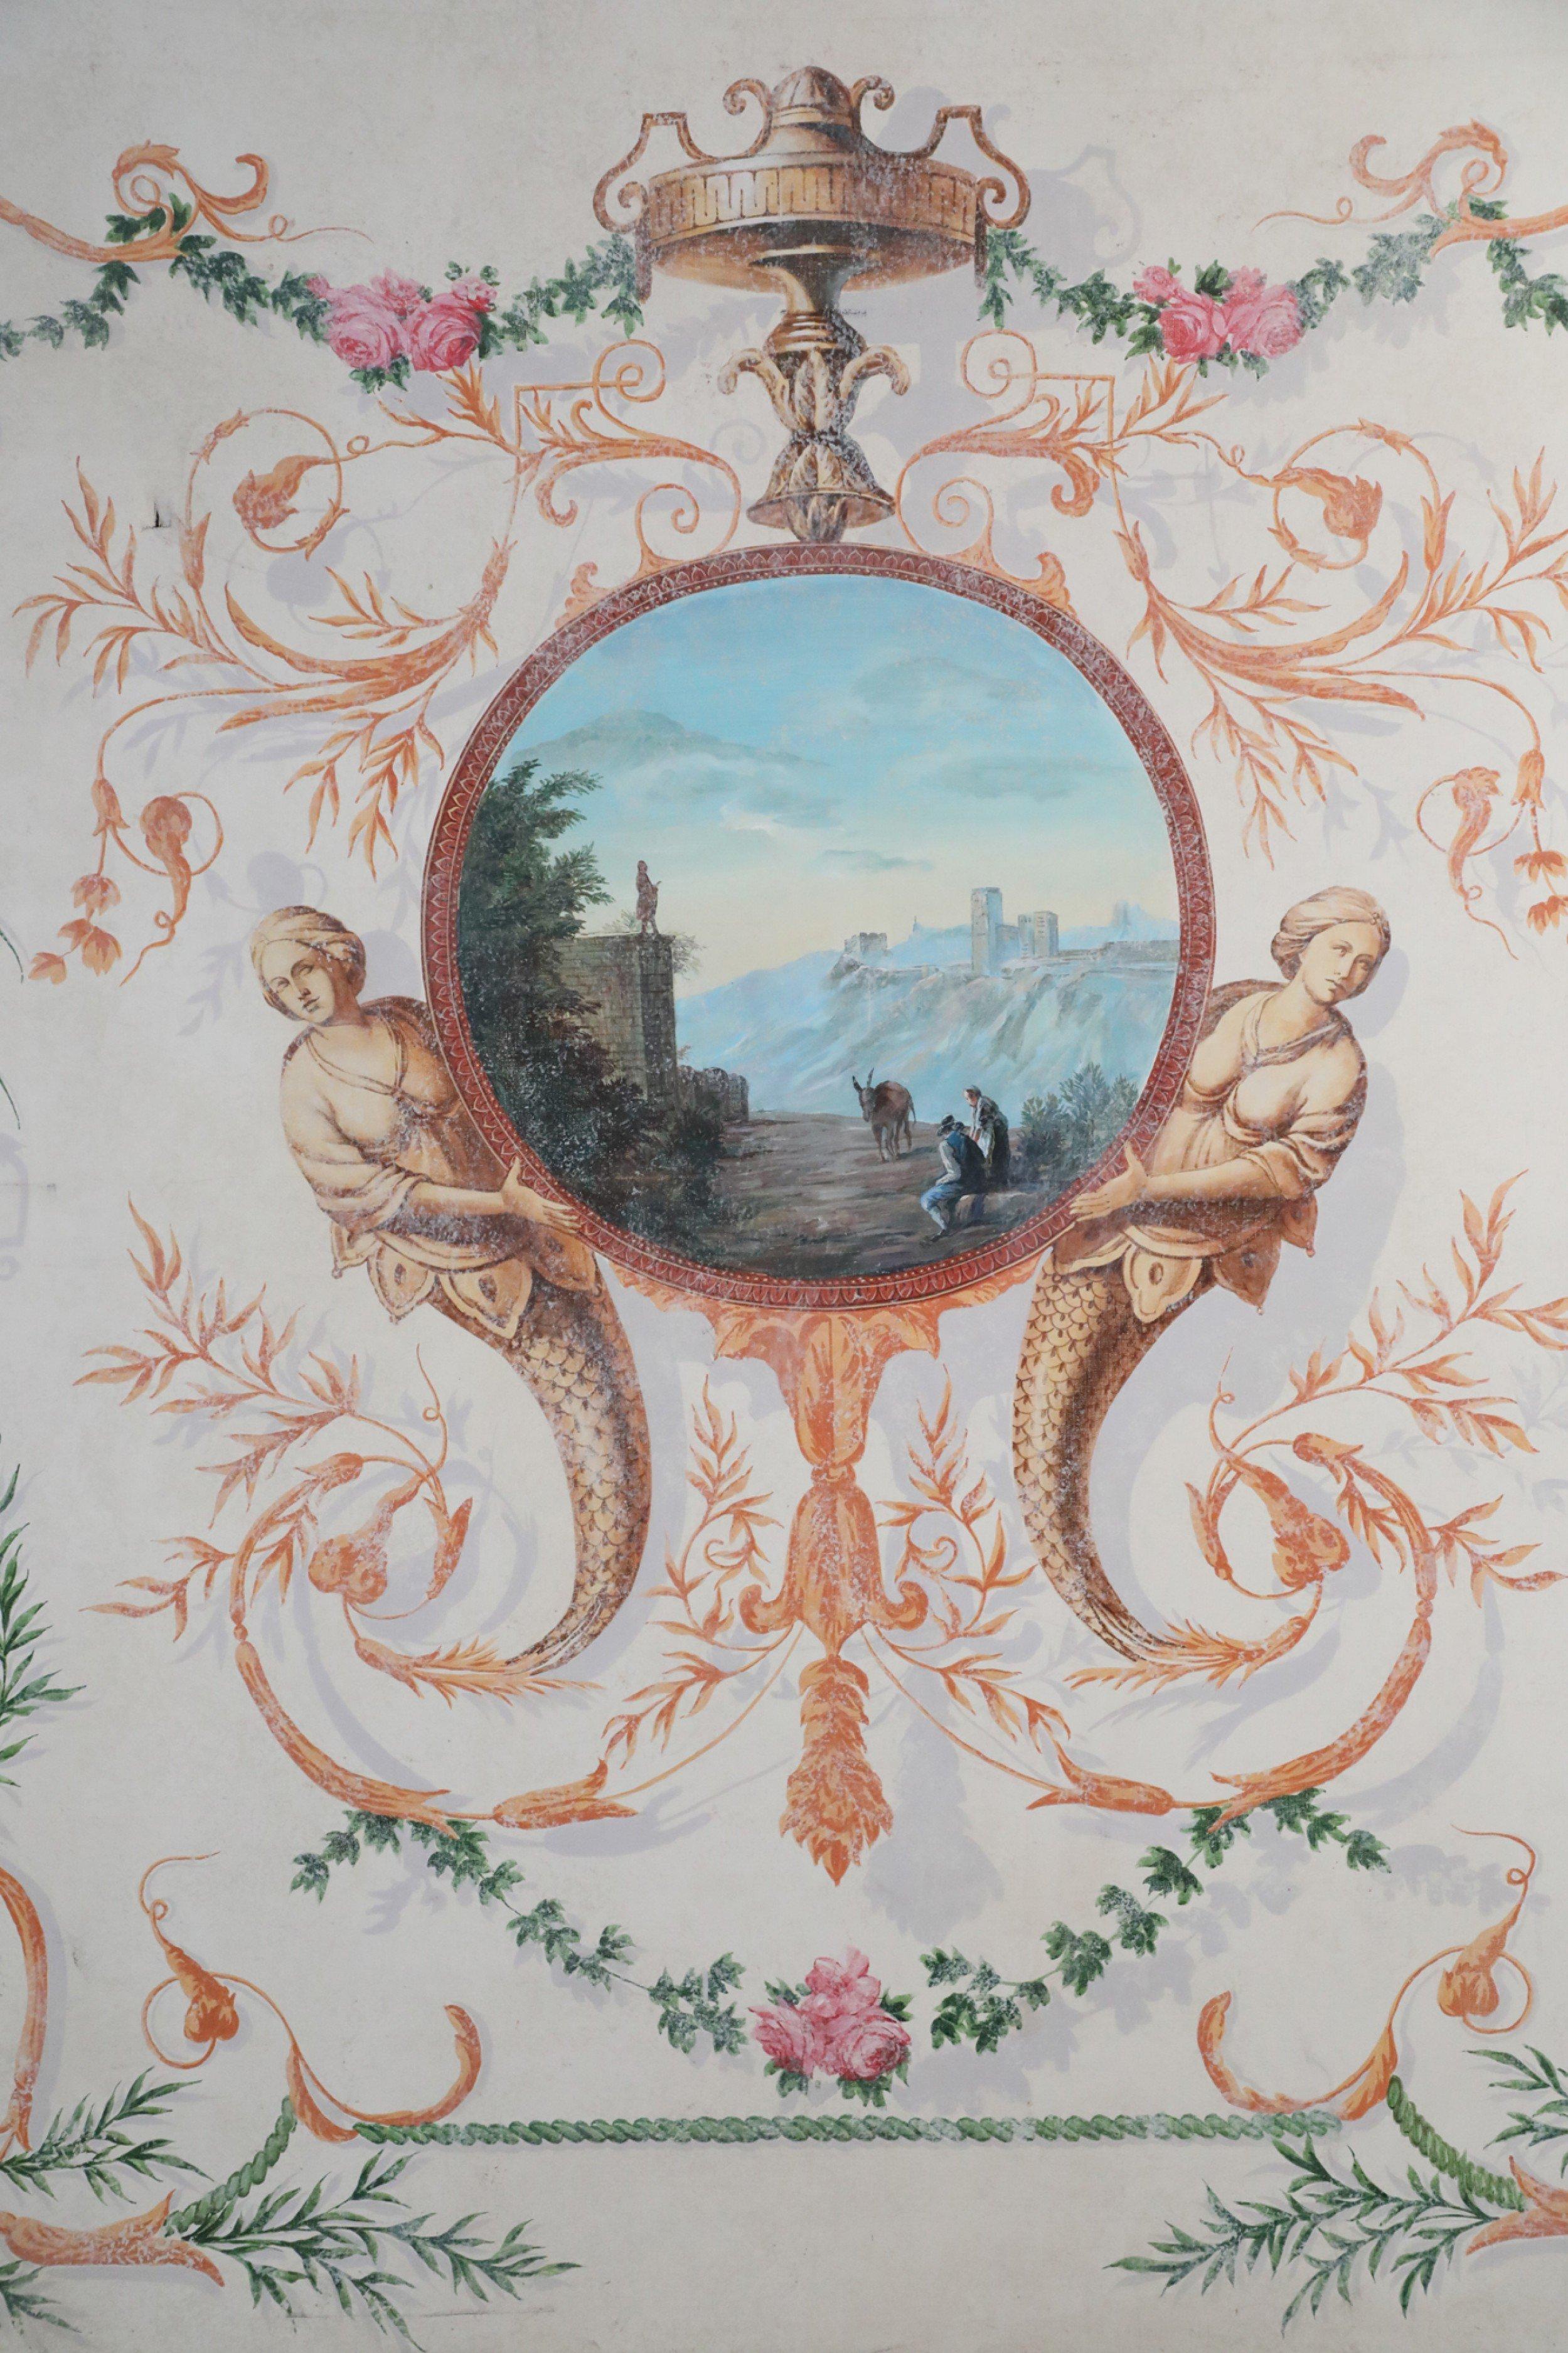 Vintage Neoclassical-Style (20th Century) acrylic painting featuring a central circular landscape scene of men and a donkey at a mountain fortress overlook, held by two mermaids and an elaborate shadowed foliate border of leaves, flowers and urns,